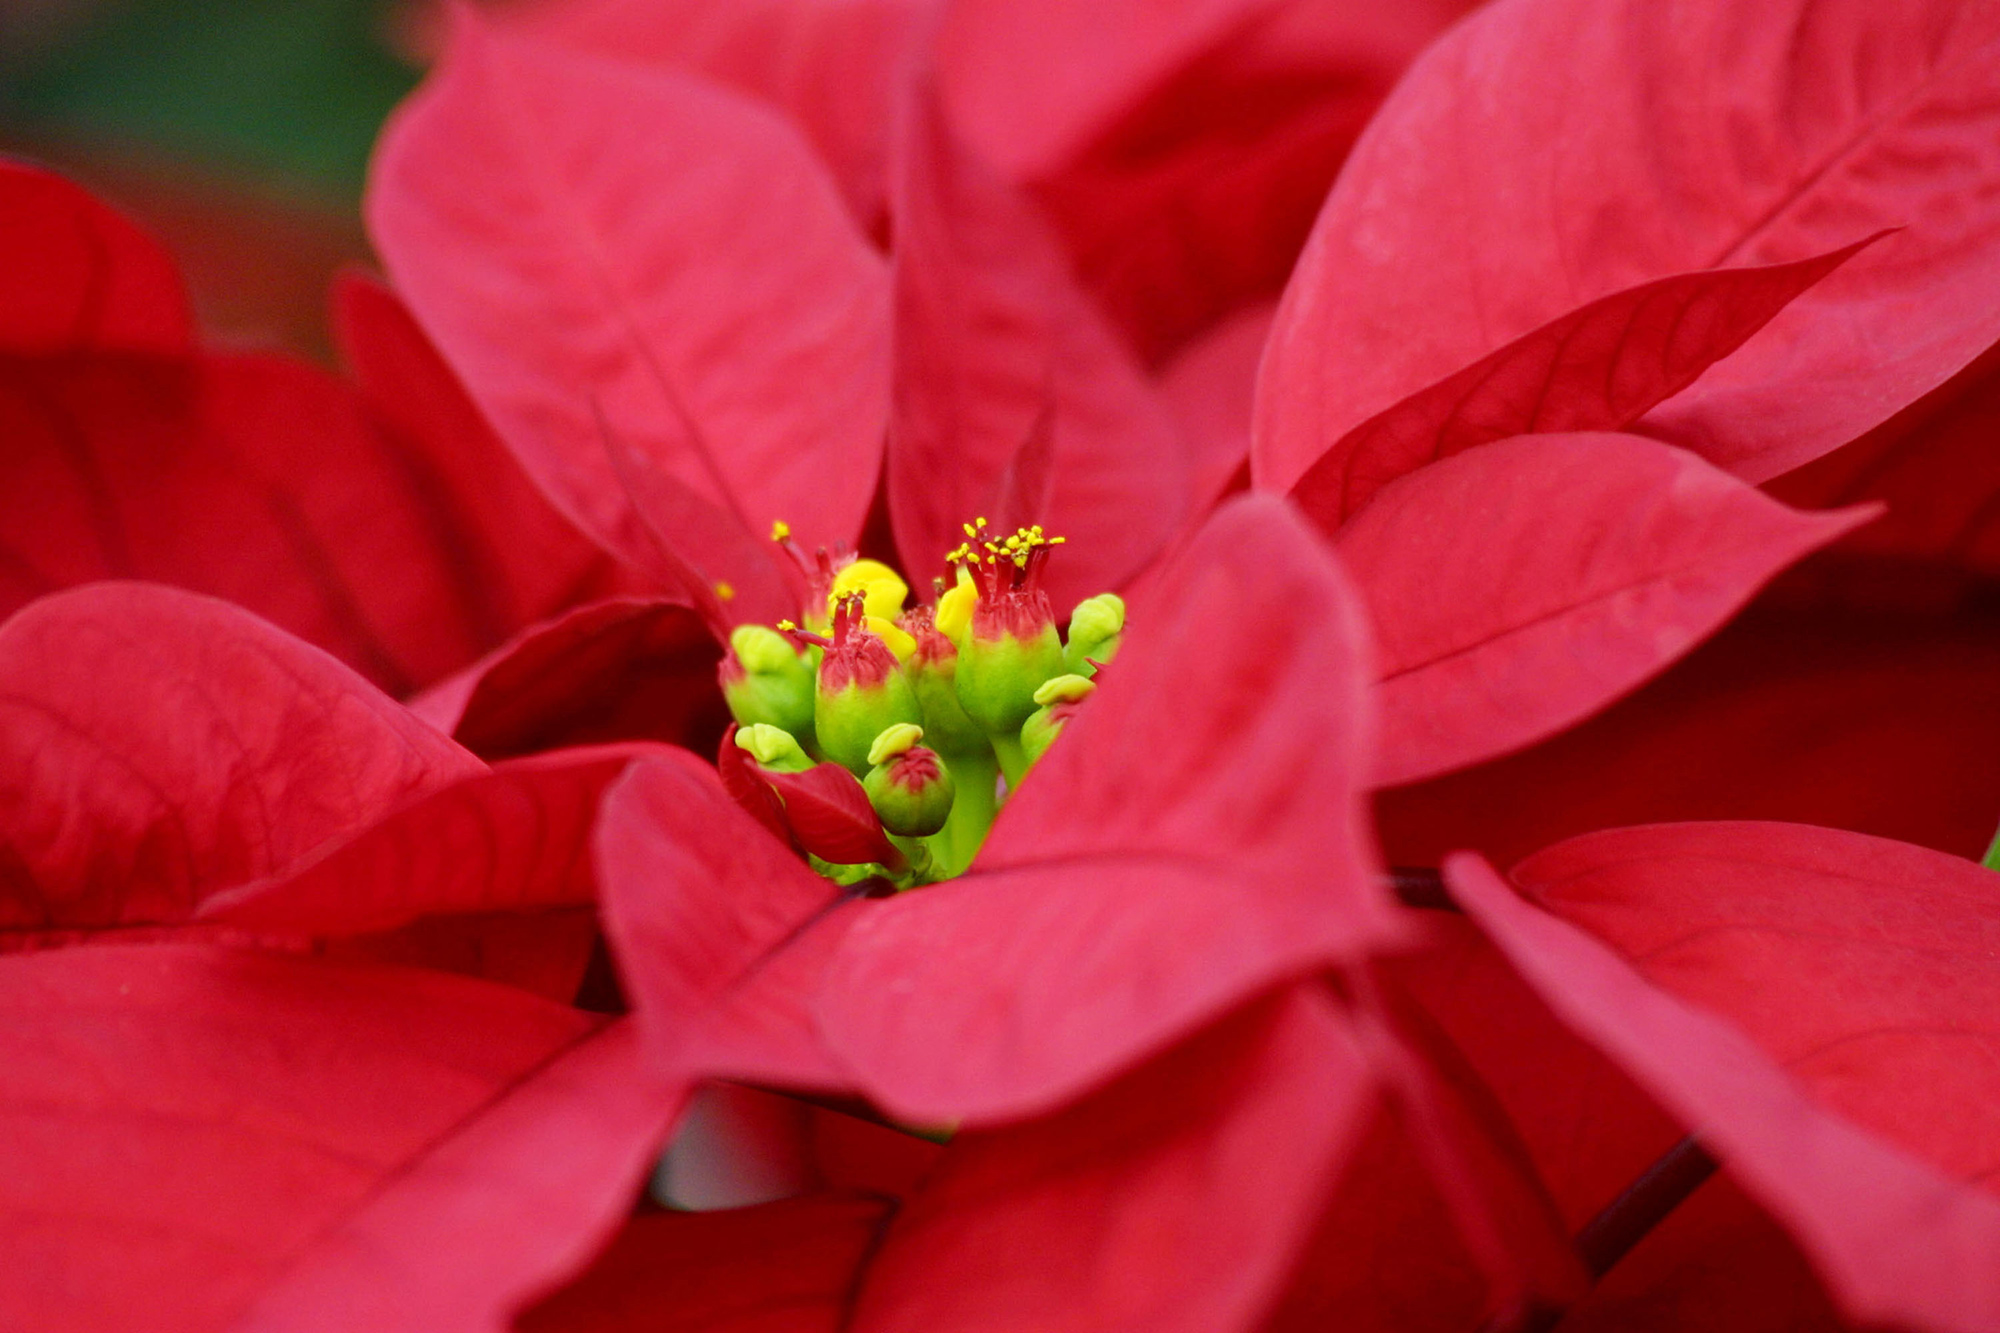 Experts have also said that poinsettias thrive in climates between 65 and 70 degrees. 